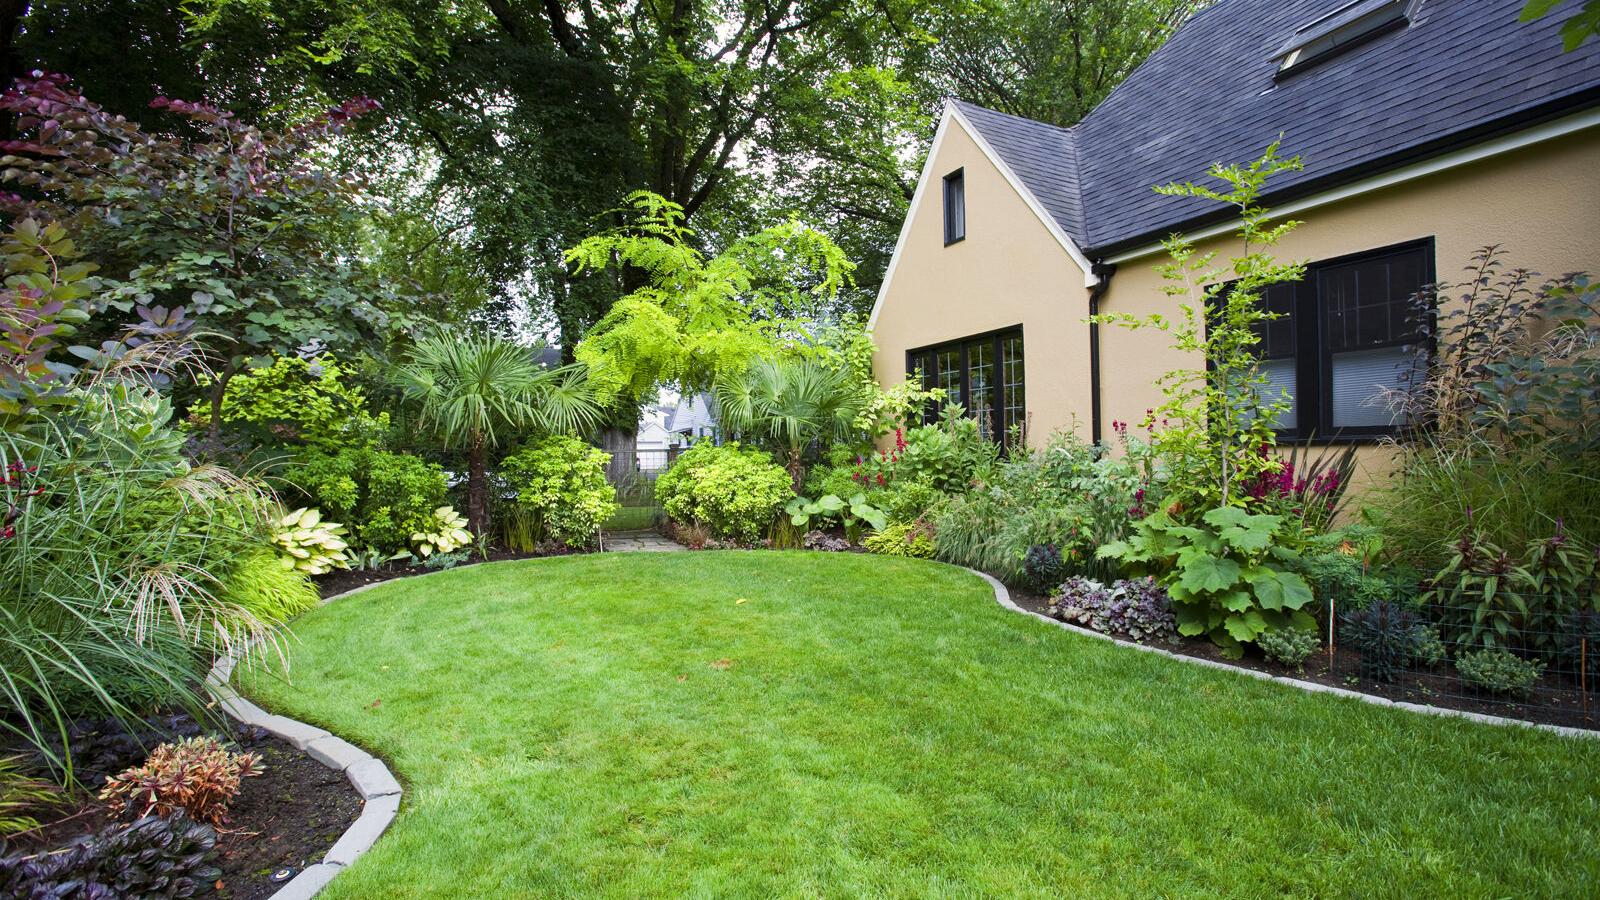 Elizabeth Exstrom: Looking for a lush lawn? Even with fall approaching, it’s not too late